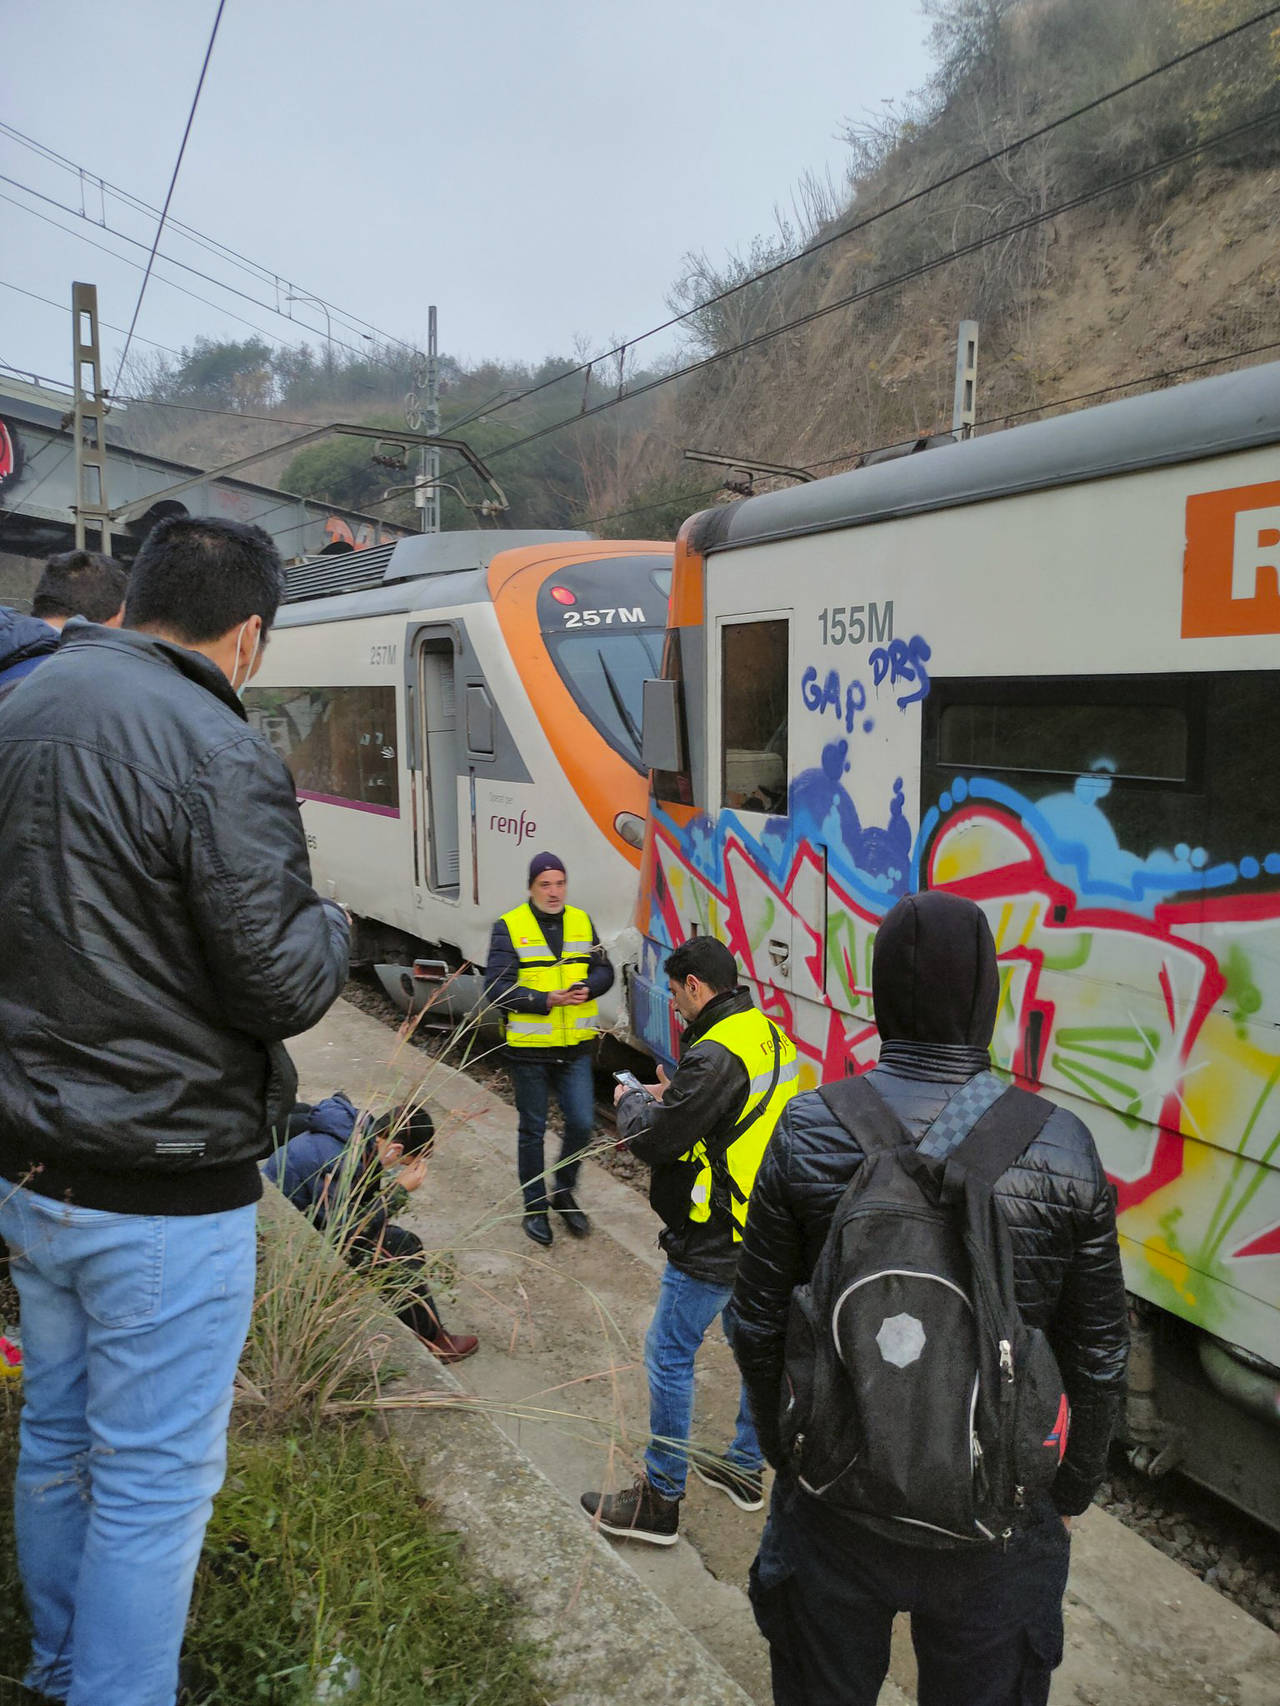 Passengers and railway staff are seen at the scene of a train collision in Montcada i Reixac, Spain...